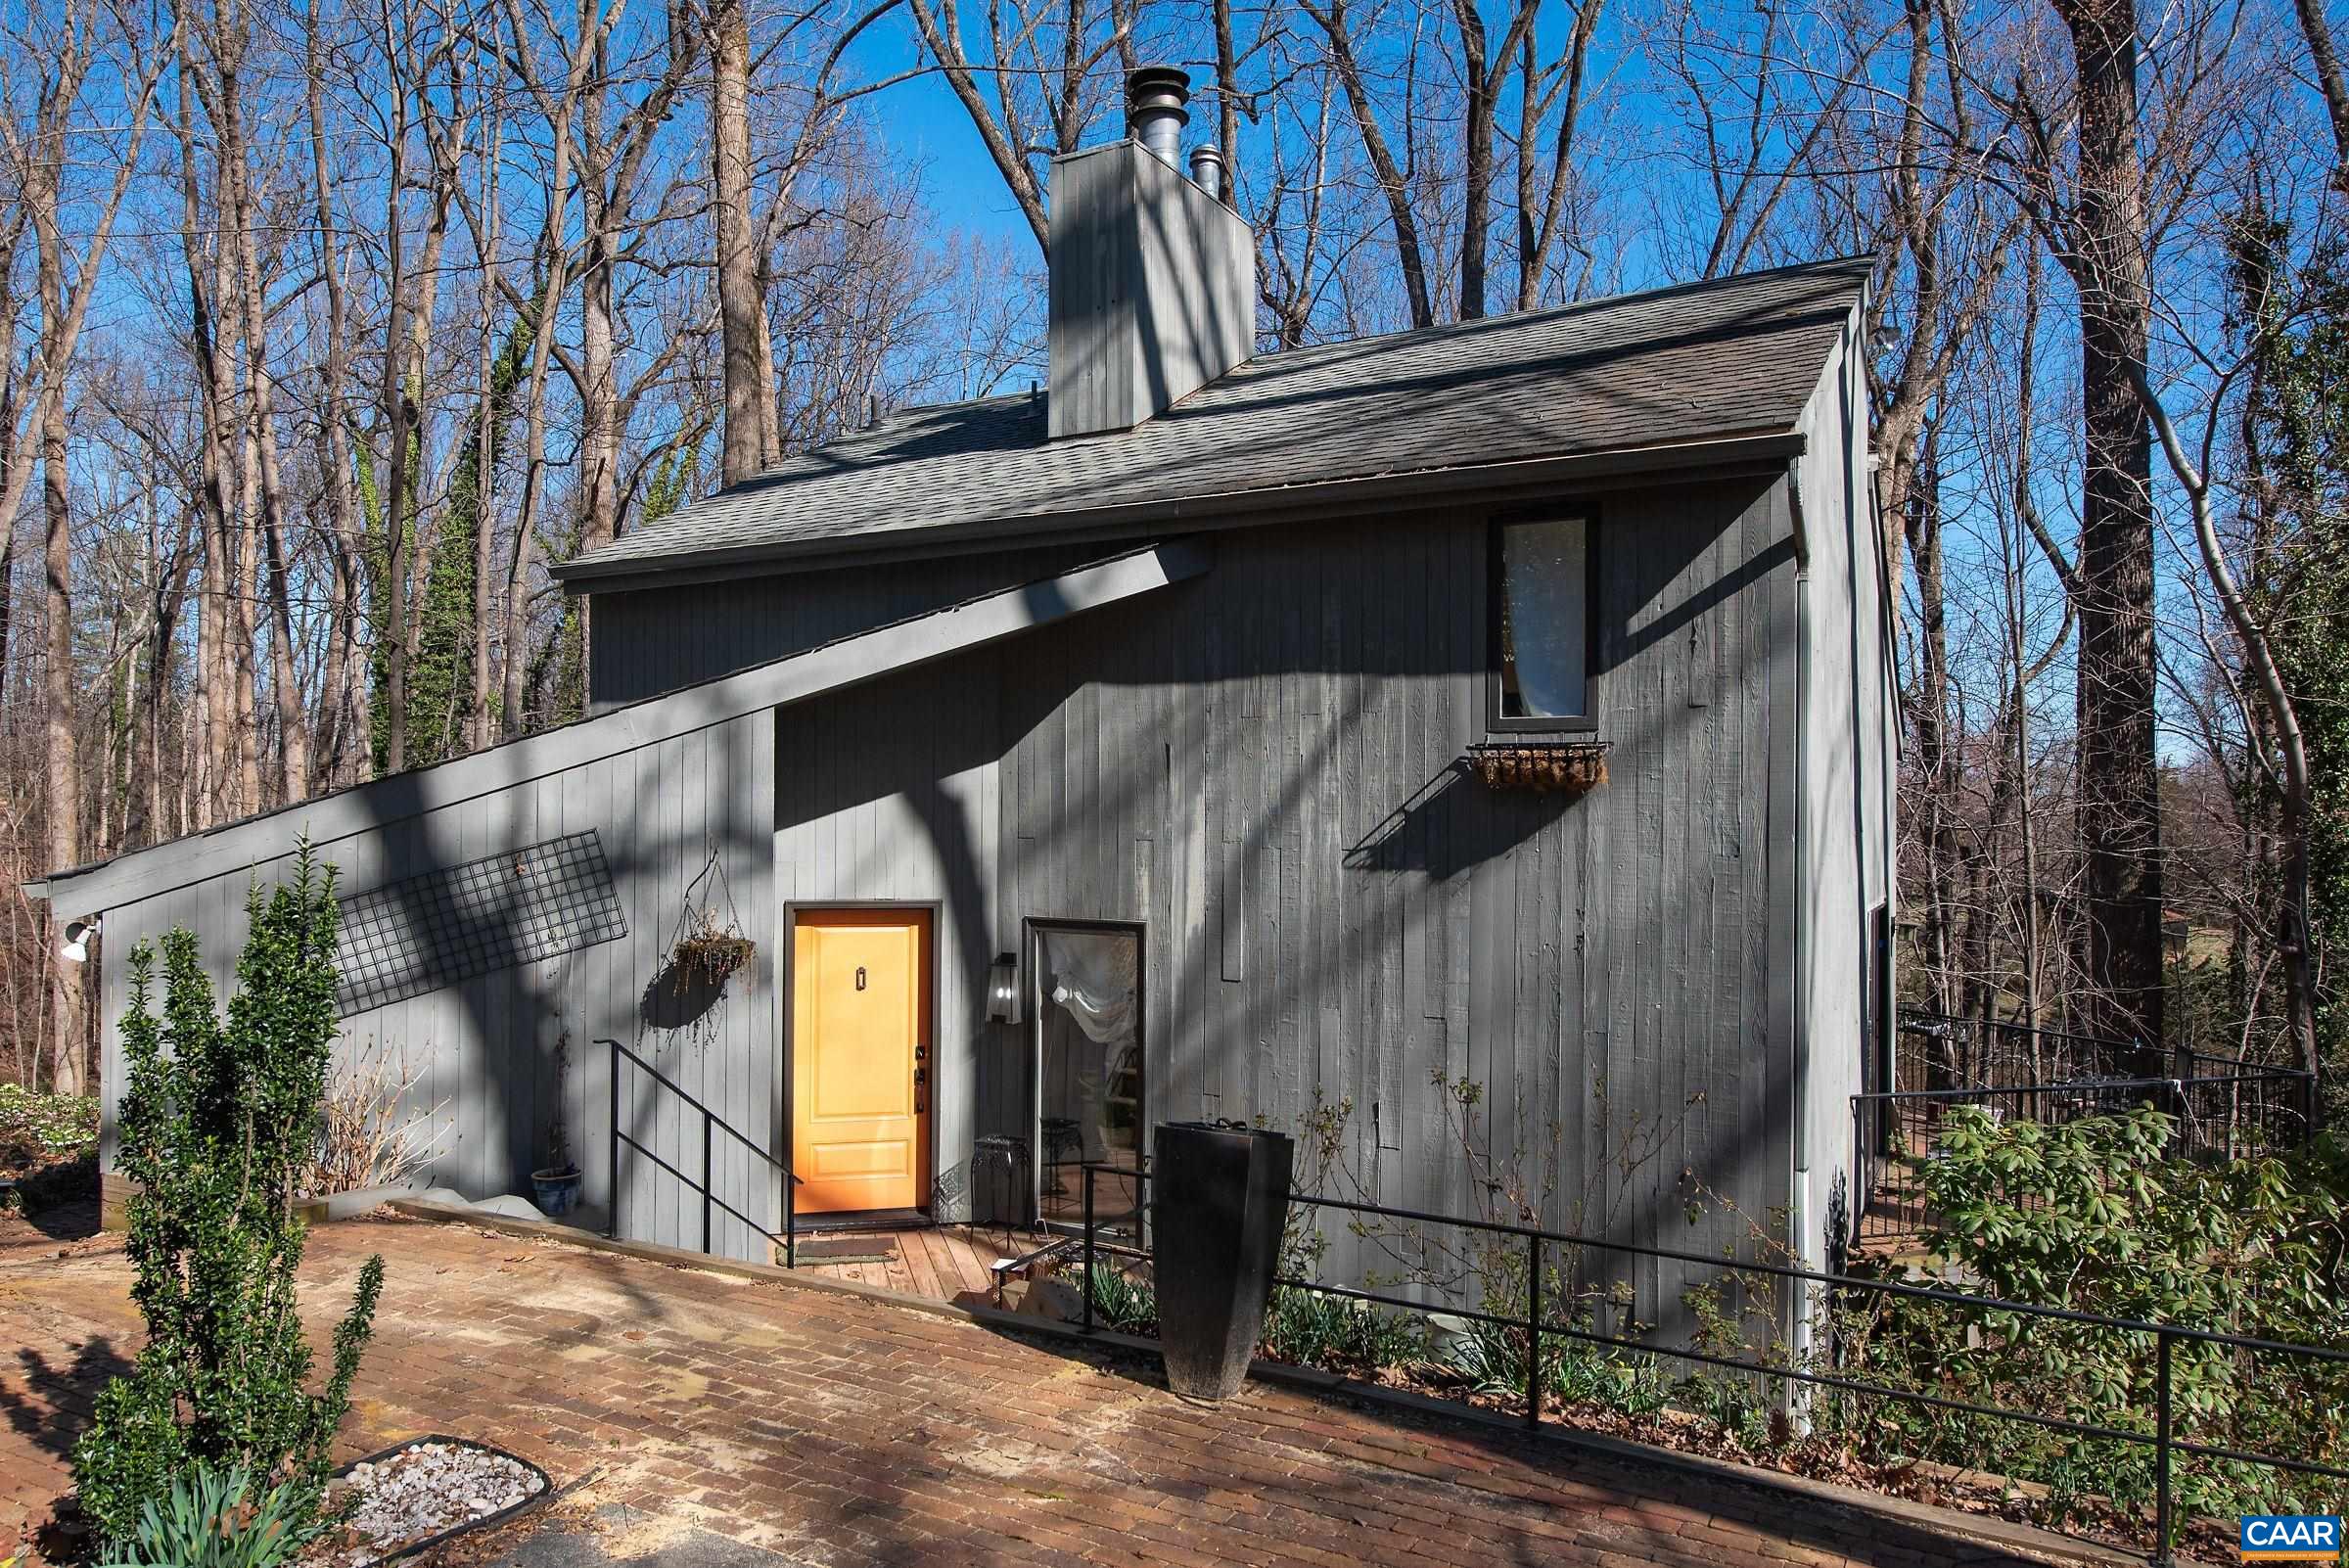 CHARMING, LIGHT-FILLED CONTEMPORARY HOME SET ON 2.6 WOODED ACRES... MASONERY FIREPLACE, BUILT-IN BOOKCASES, VAULTED CEILING, FRONT BRICK TERRACE, REAR AND SIDE DECKS....GREAT FOR BIRDWATCHING...THREE BEDROOMS AND THREE FULL BATHS...INCLUDING AN IN-LAW SUITE ON THE TERRACE LEVEL....